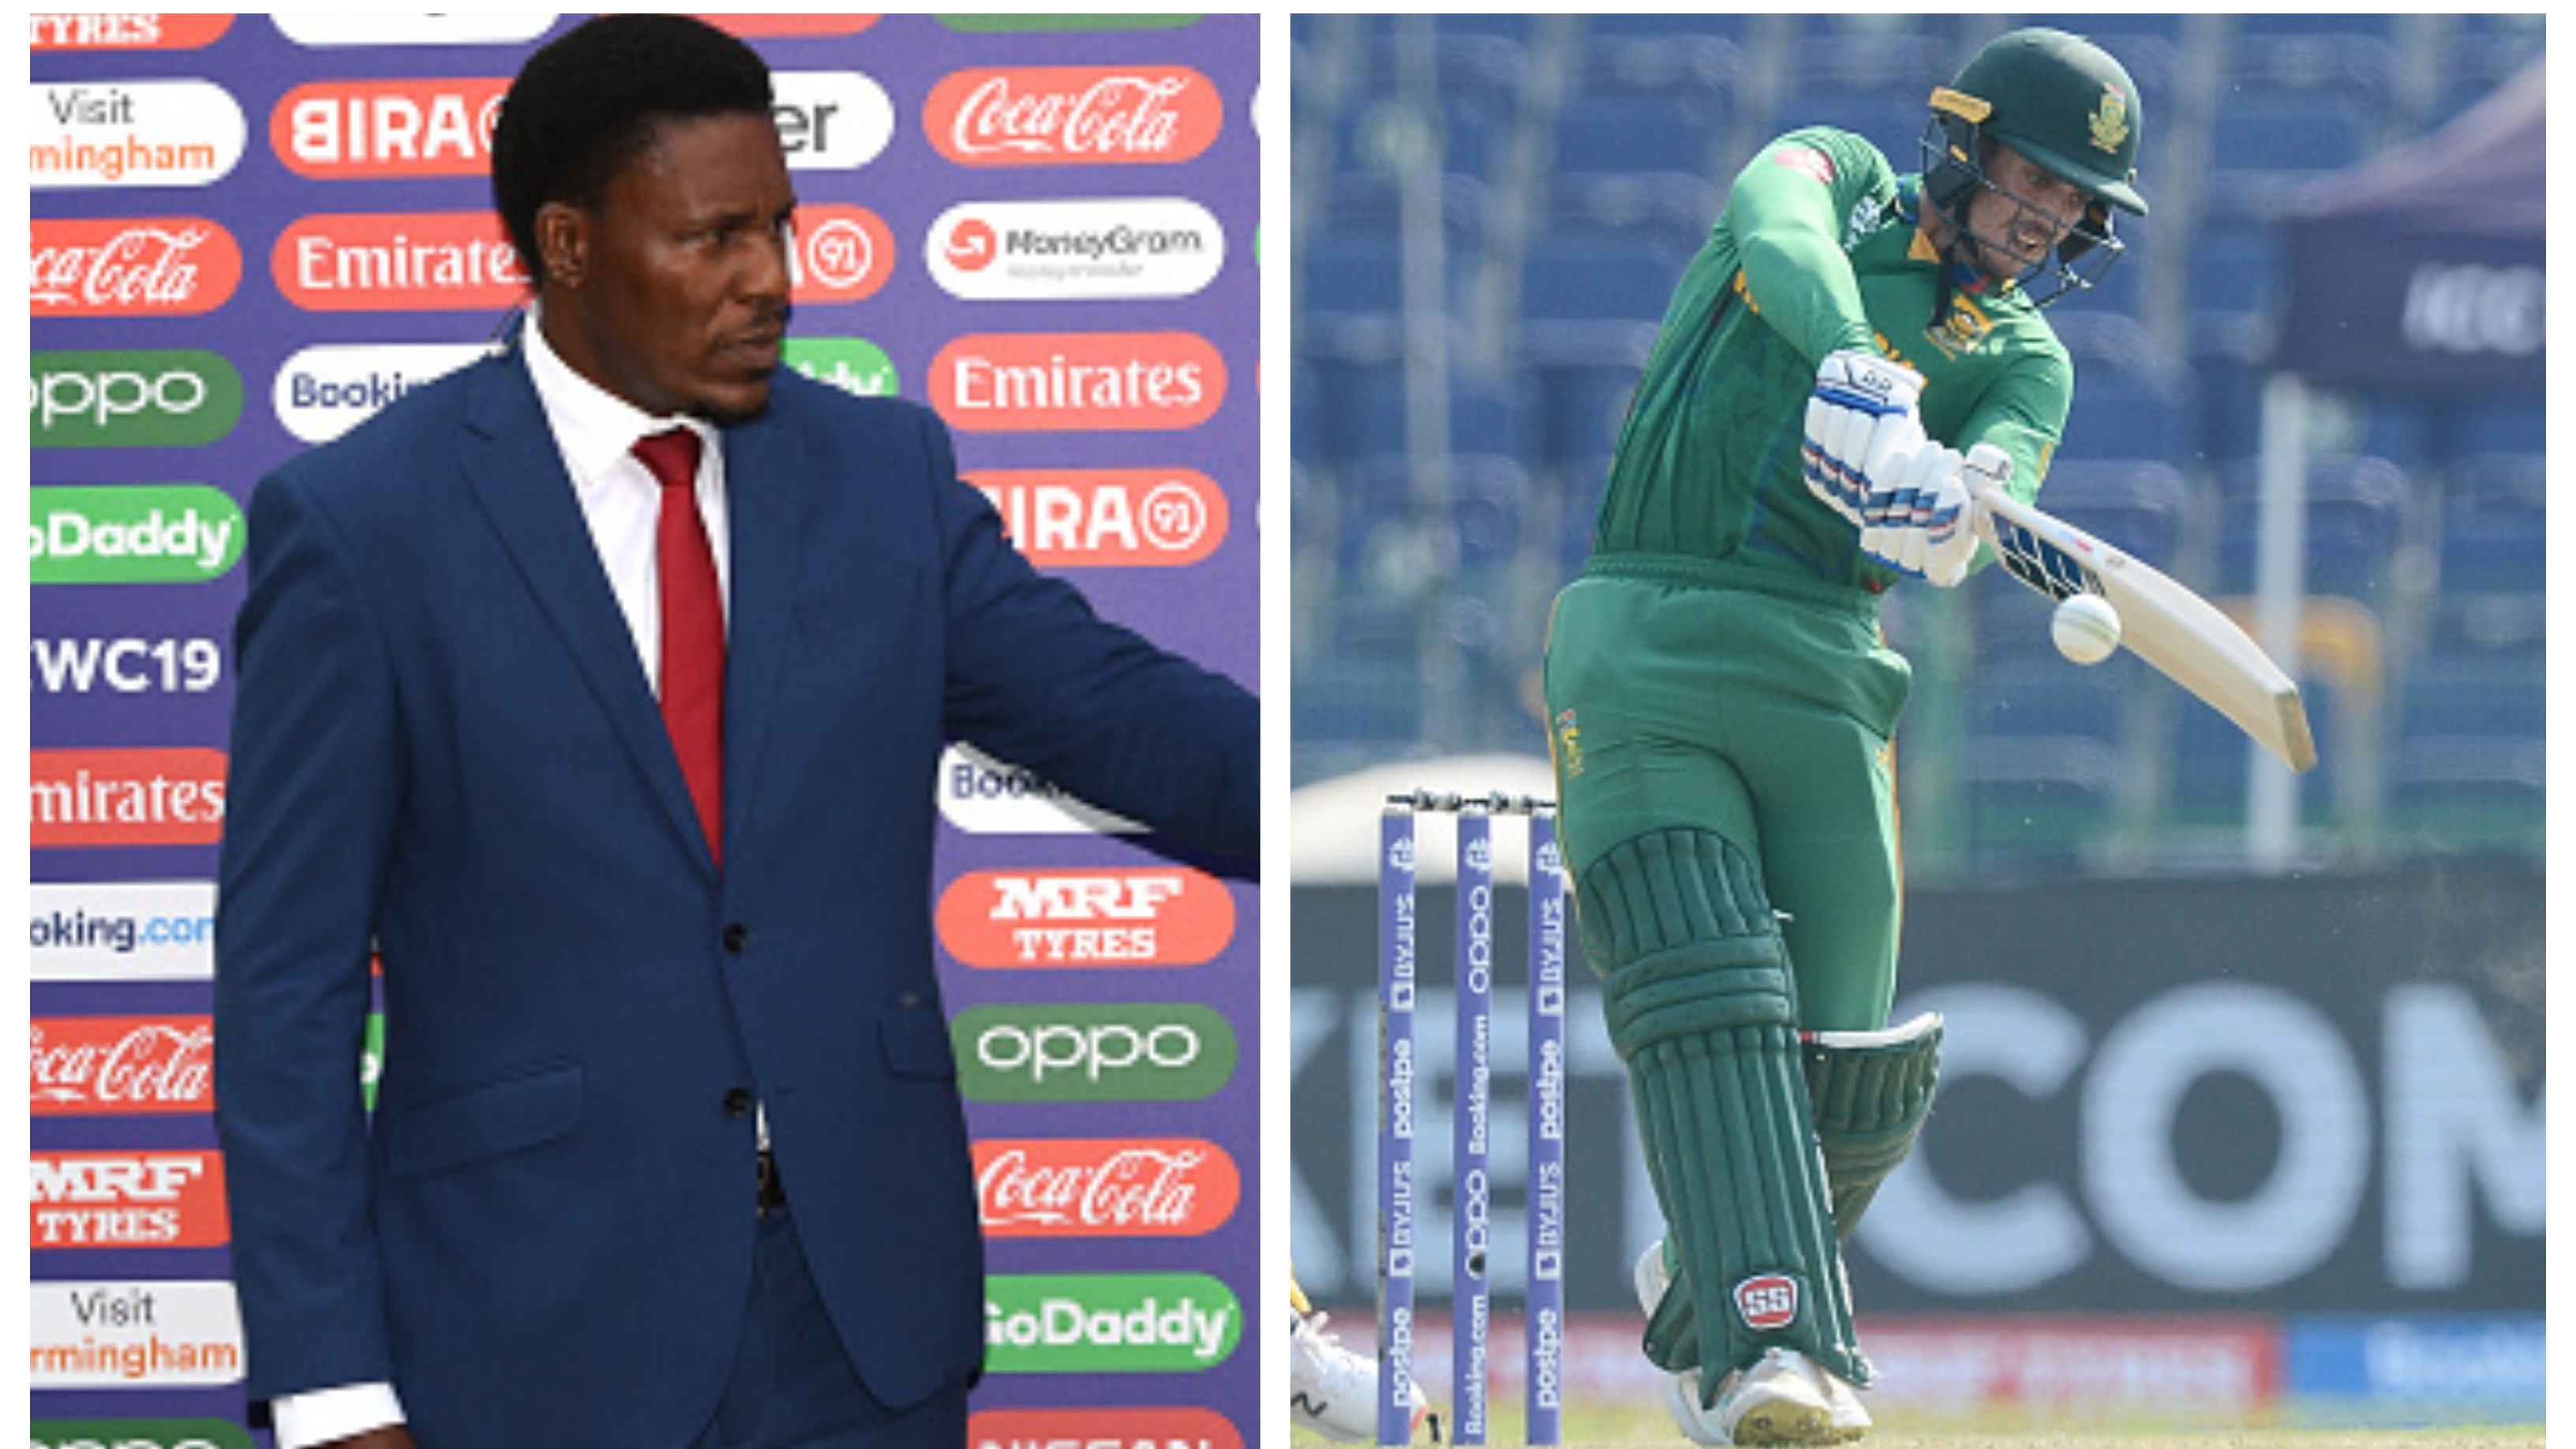 T20 World Cup 2021: ‘I cannot shed my skin’, Pommie Mbangwa’s strong message after De Kock’s refusal to take knee